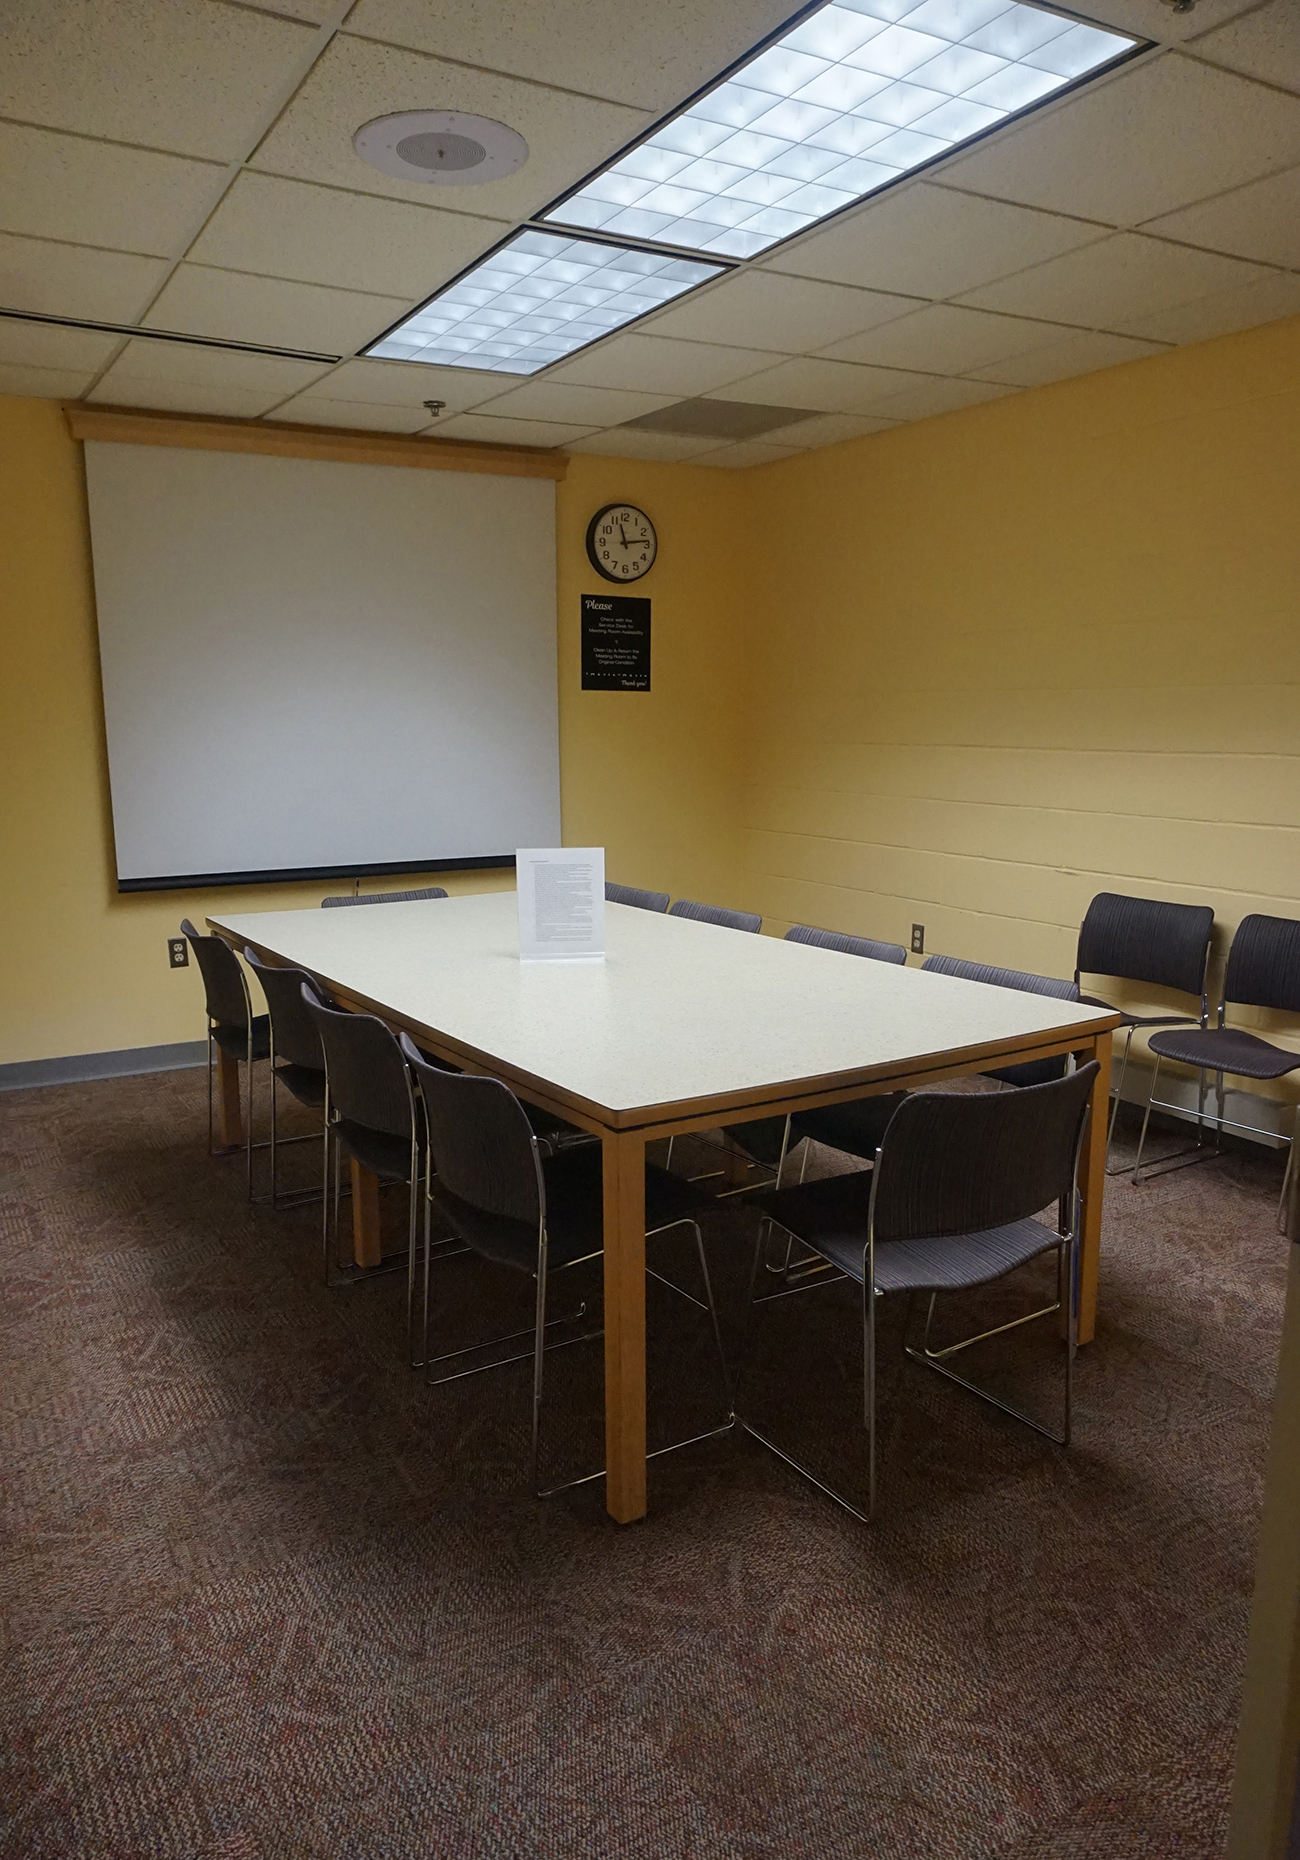 Rectangular table with chairs, white screen at front